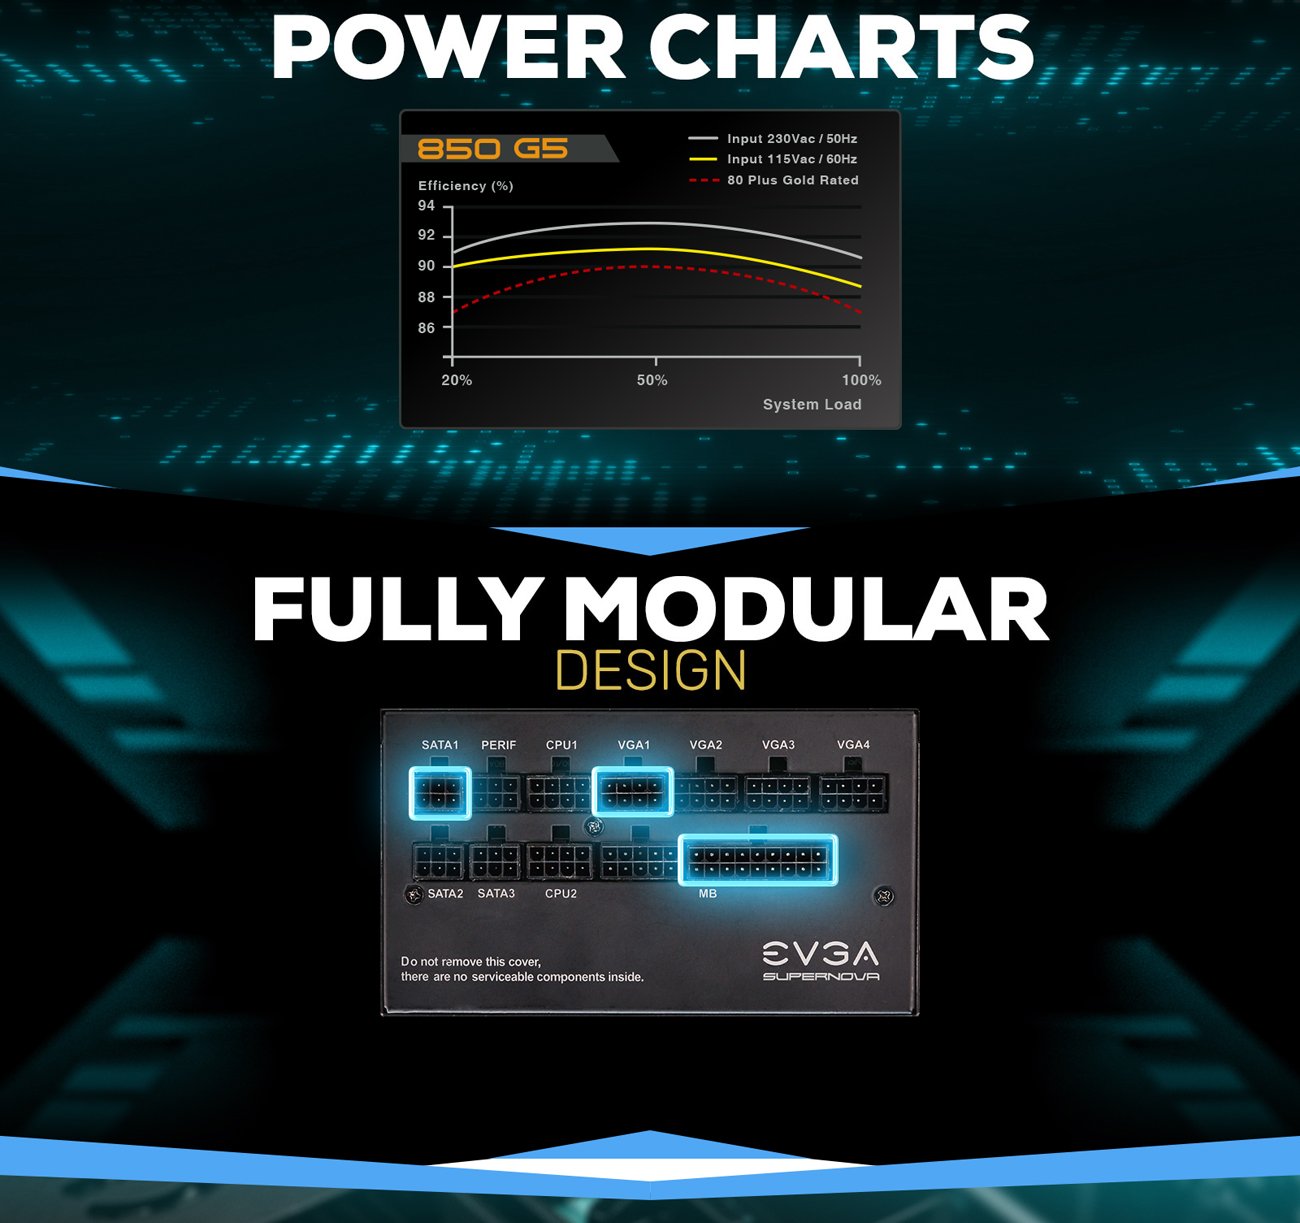 Power charts and fully modular ports